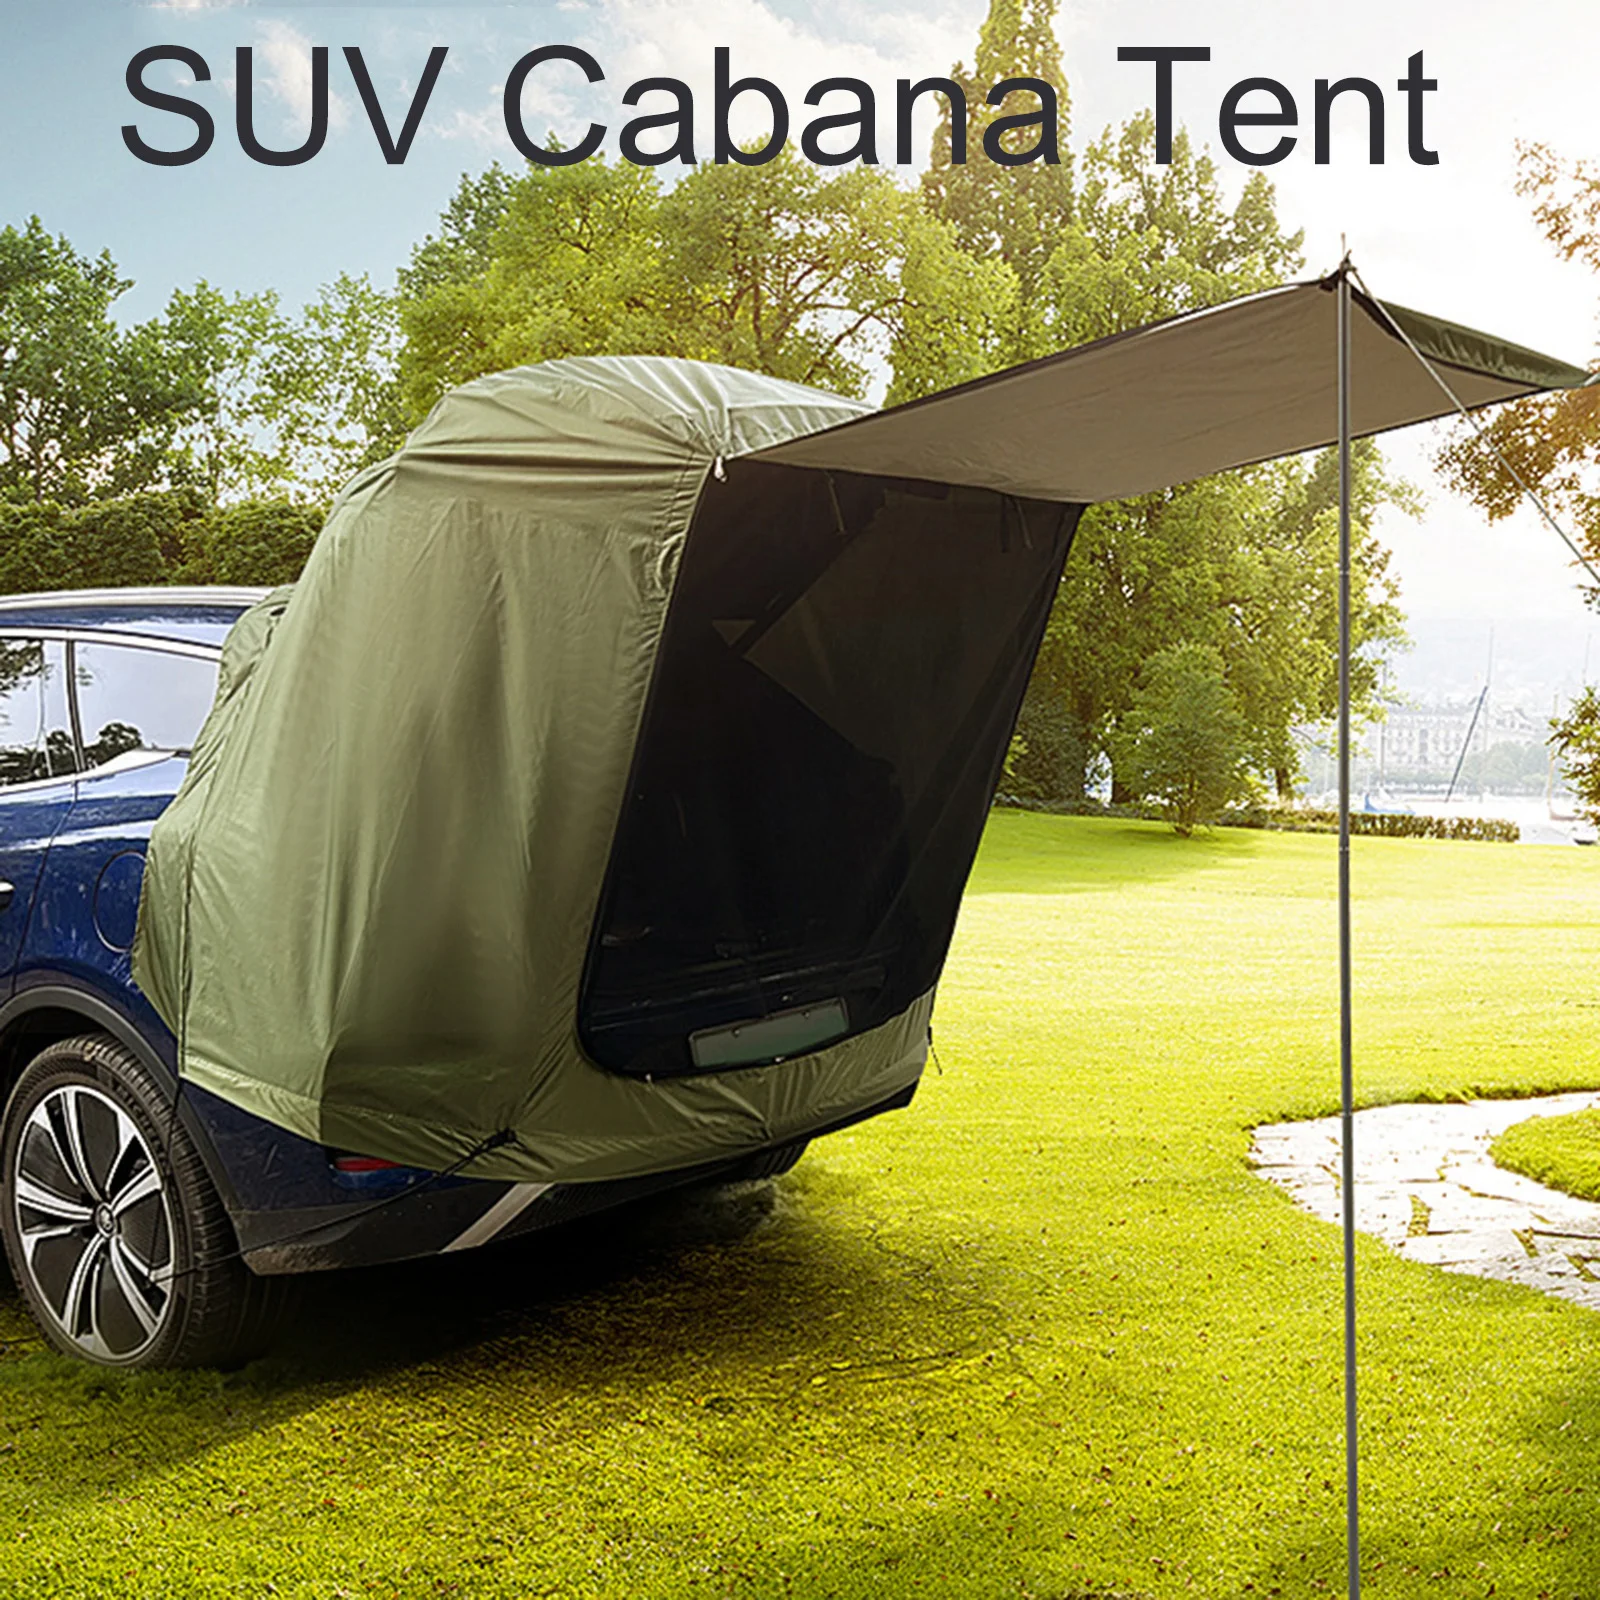 1set Camping Tent Kits SUV Cabana Tent with Awning Shade Large Space Wide Vision - £46.85 GBP